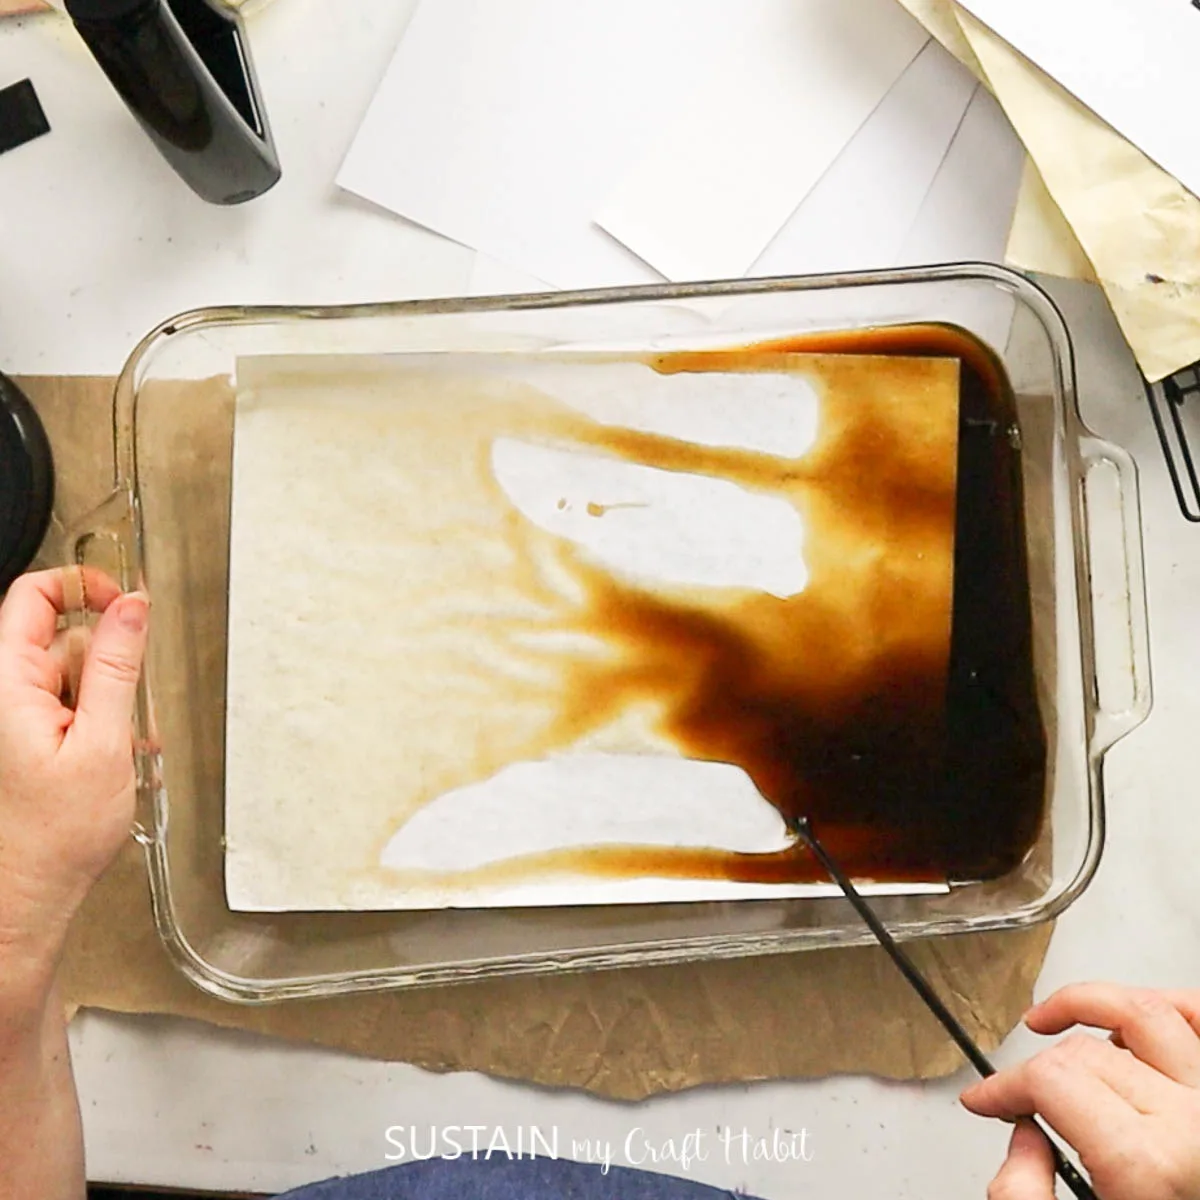 placing plain paper into a shallow pan with coffee